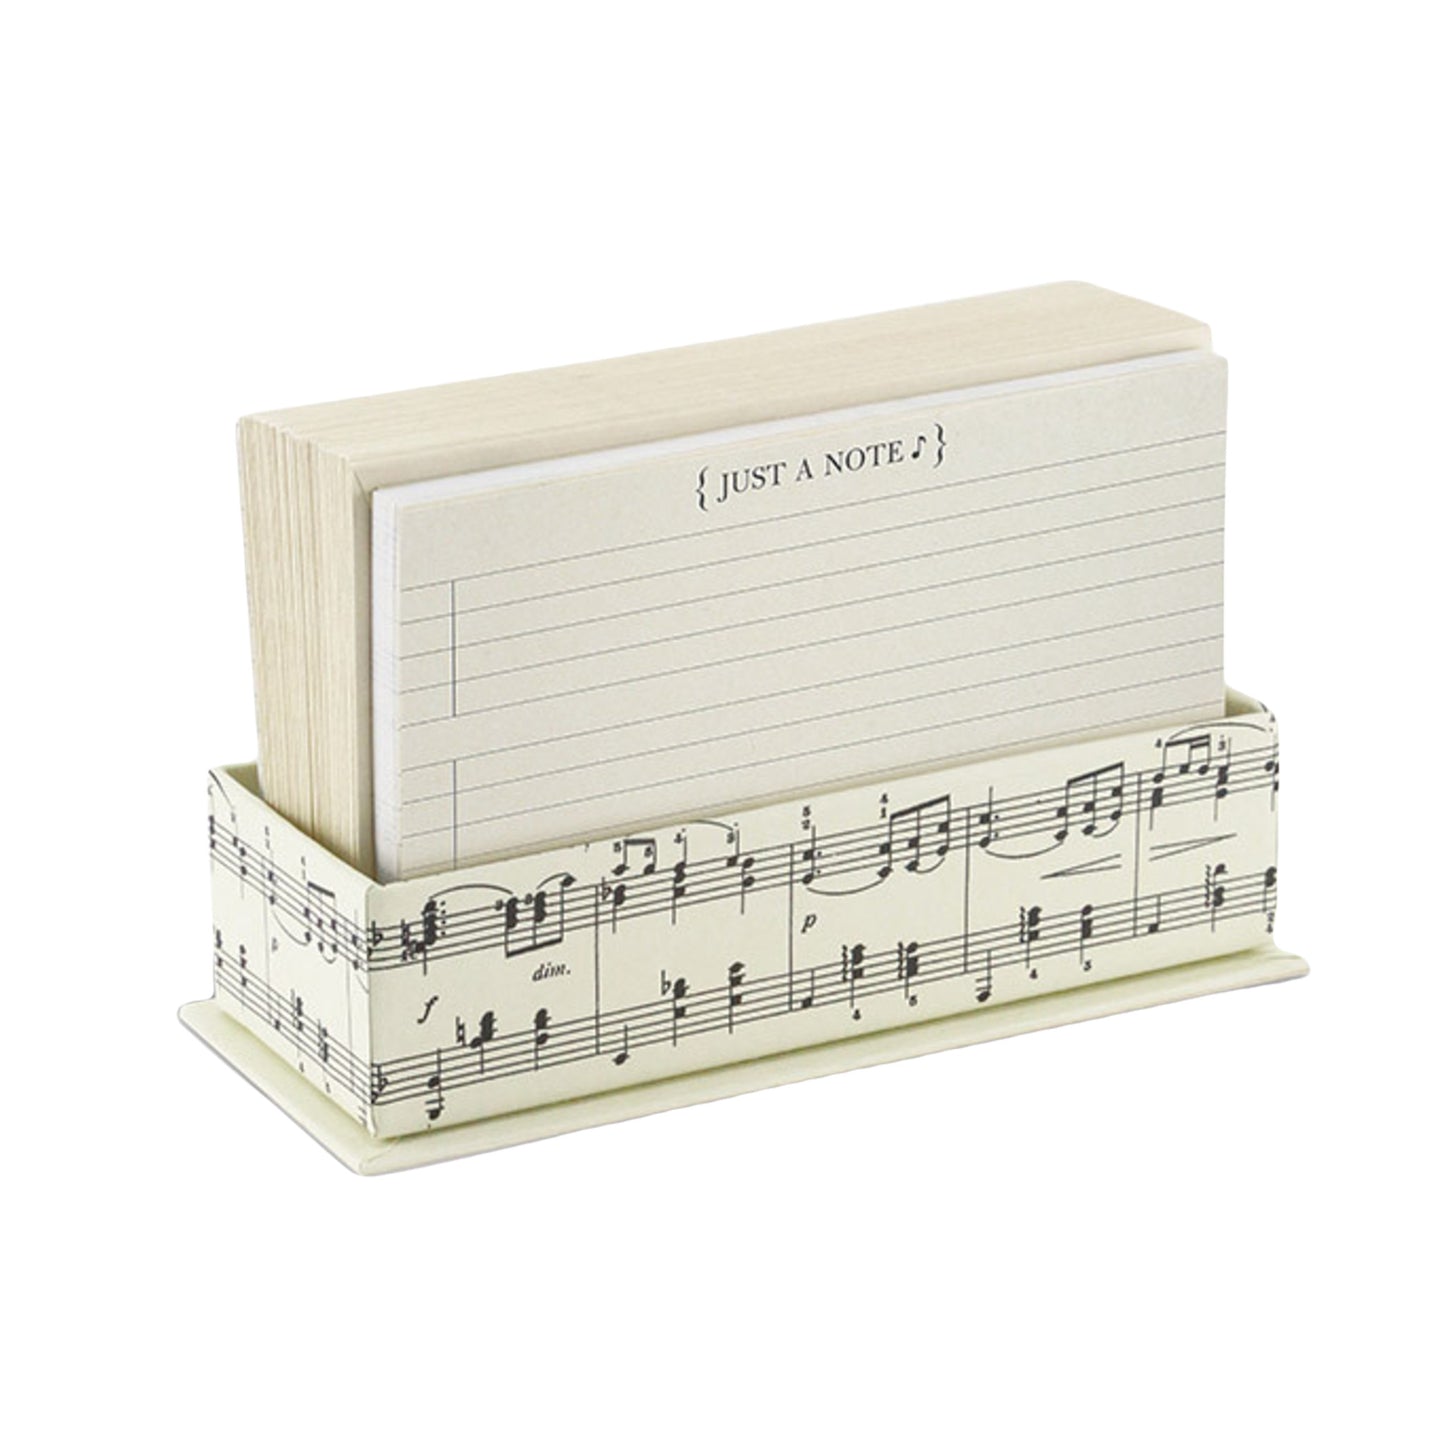 Just a Note Notecard Set